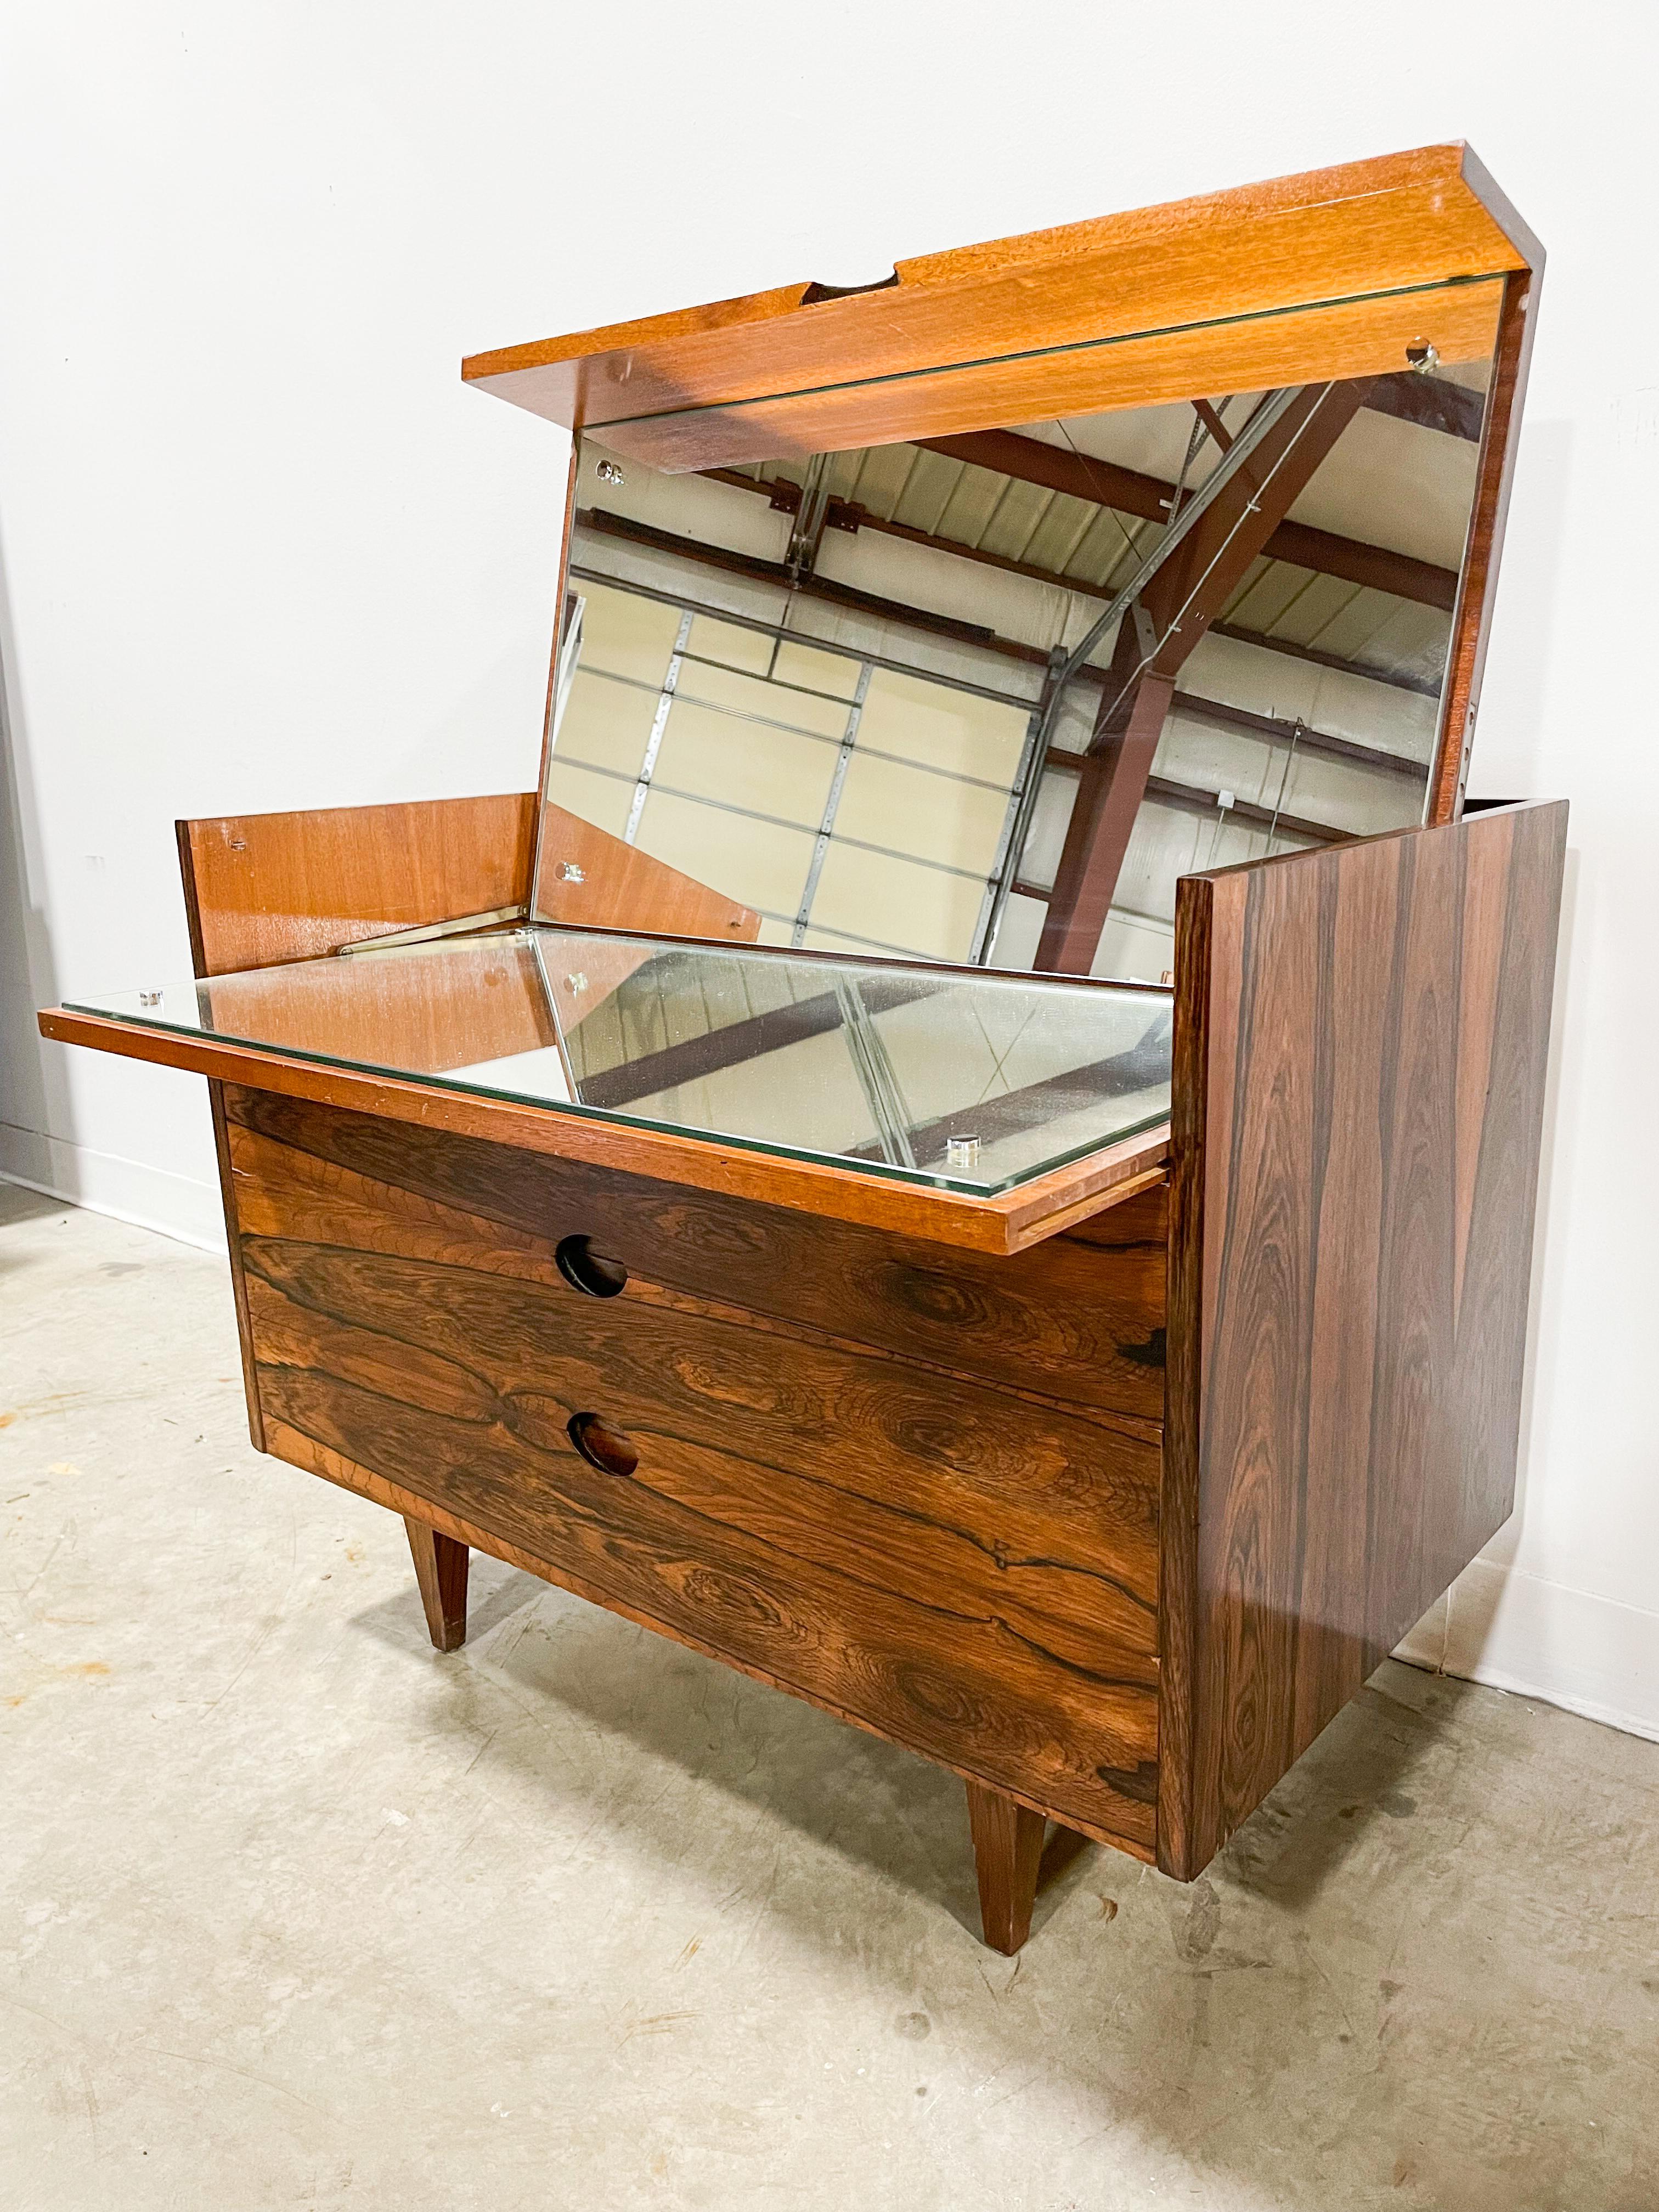 In rare rosewood, this Mid-Century Modern mirrored dresser is a wonderful addition to any home. The stunning grain is eye-catching and unique, and the dresser is in very good vintage condition. The top opens up to reveal both a vertical mirror and a